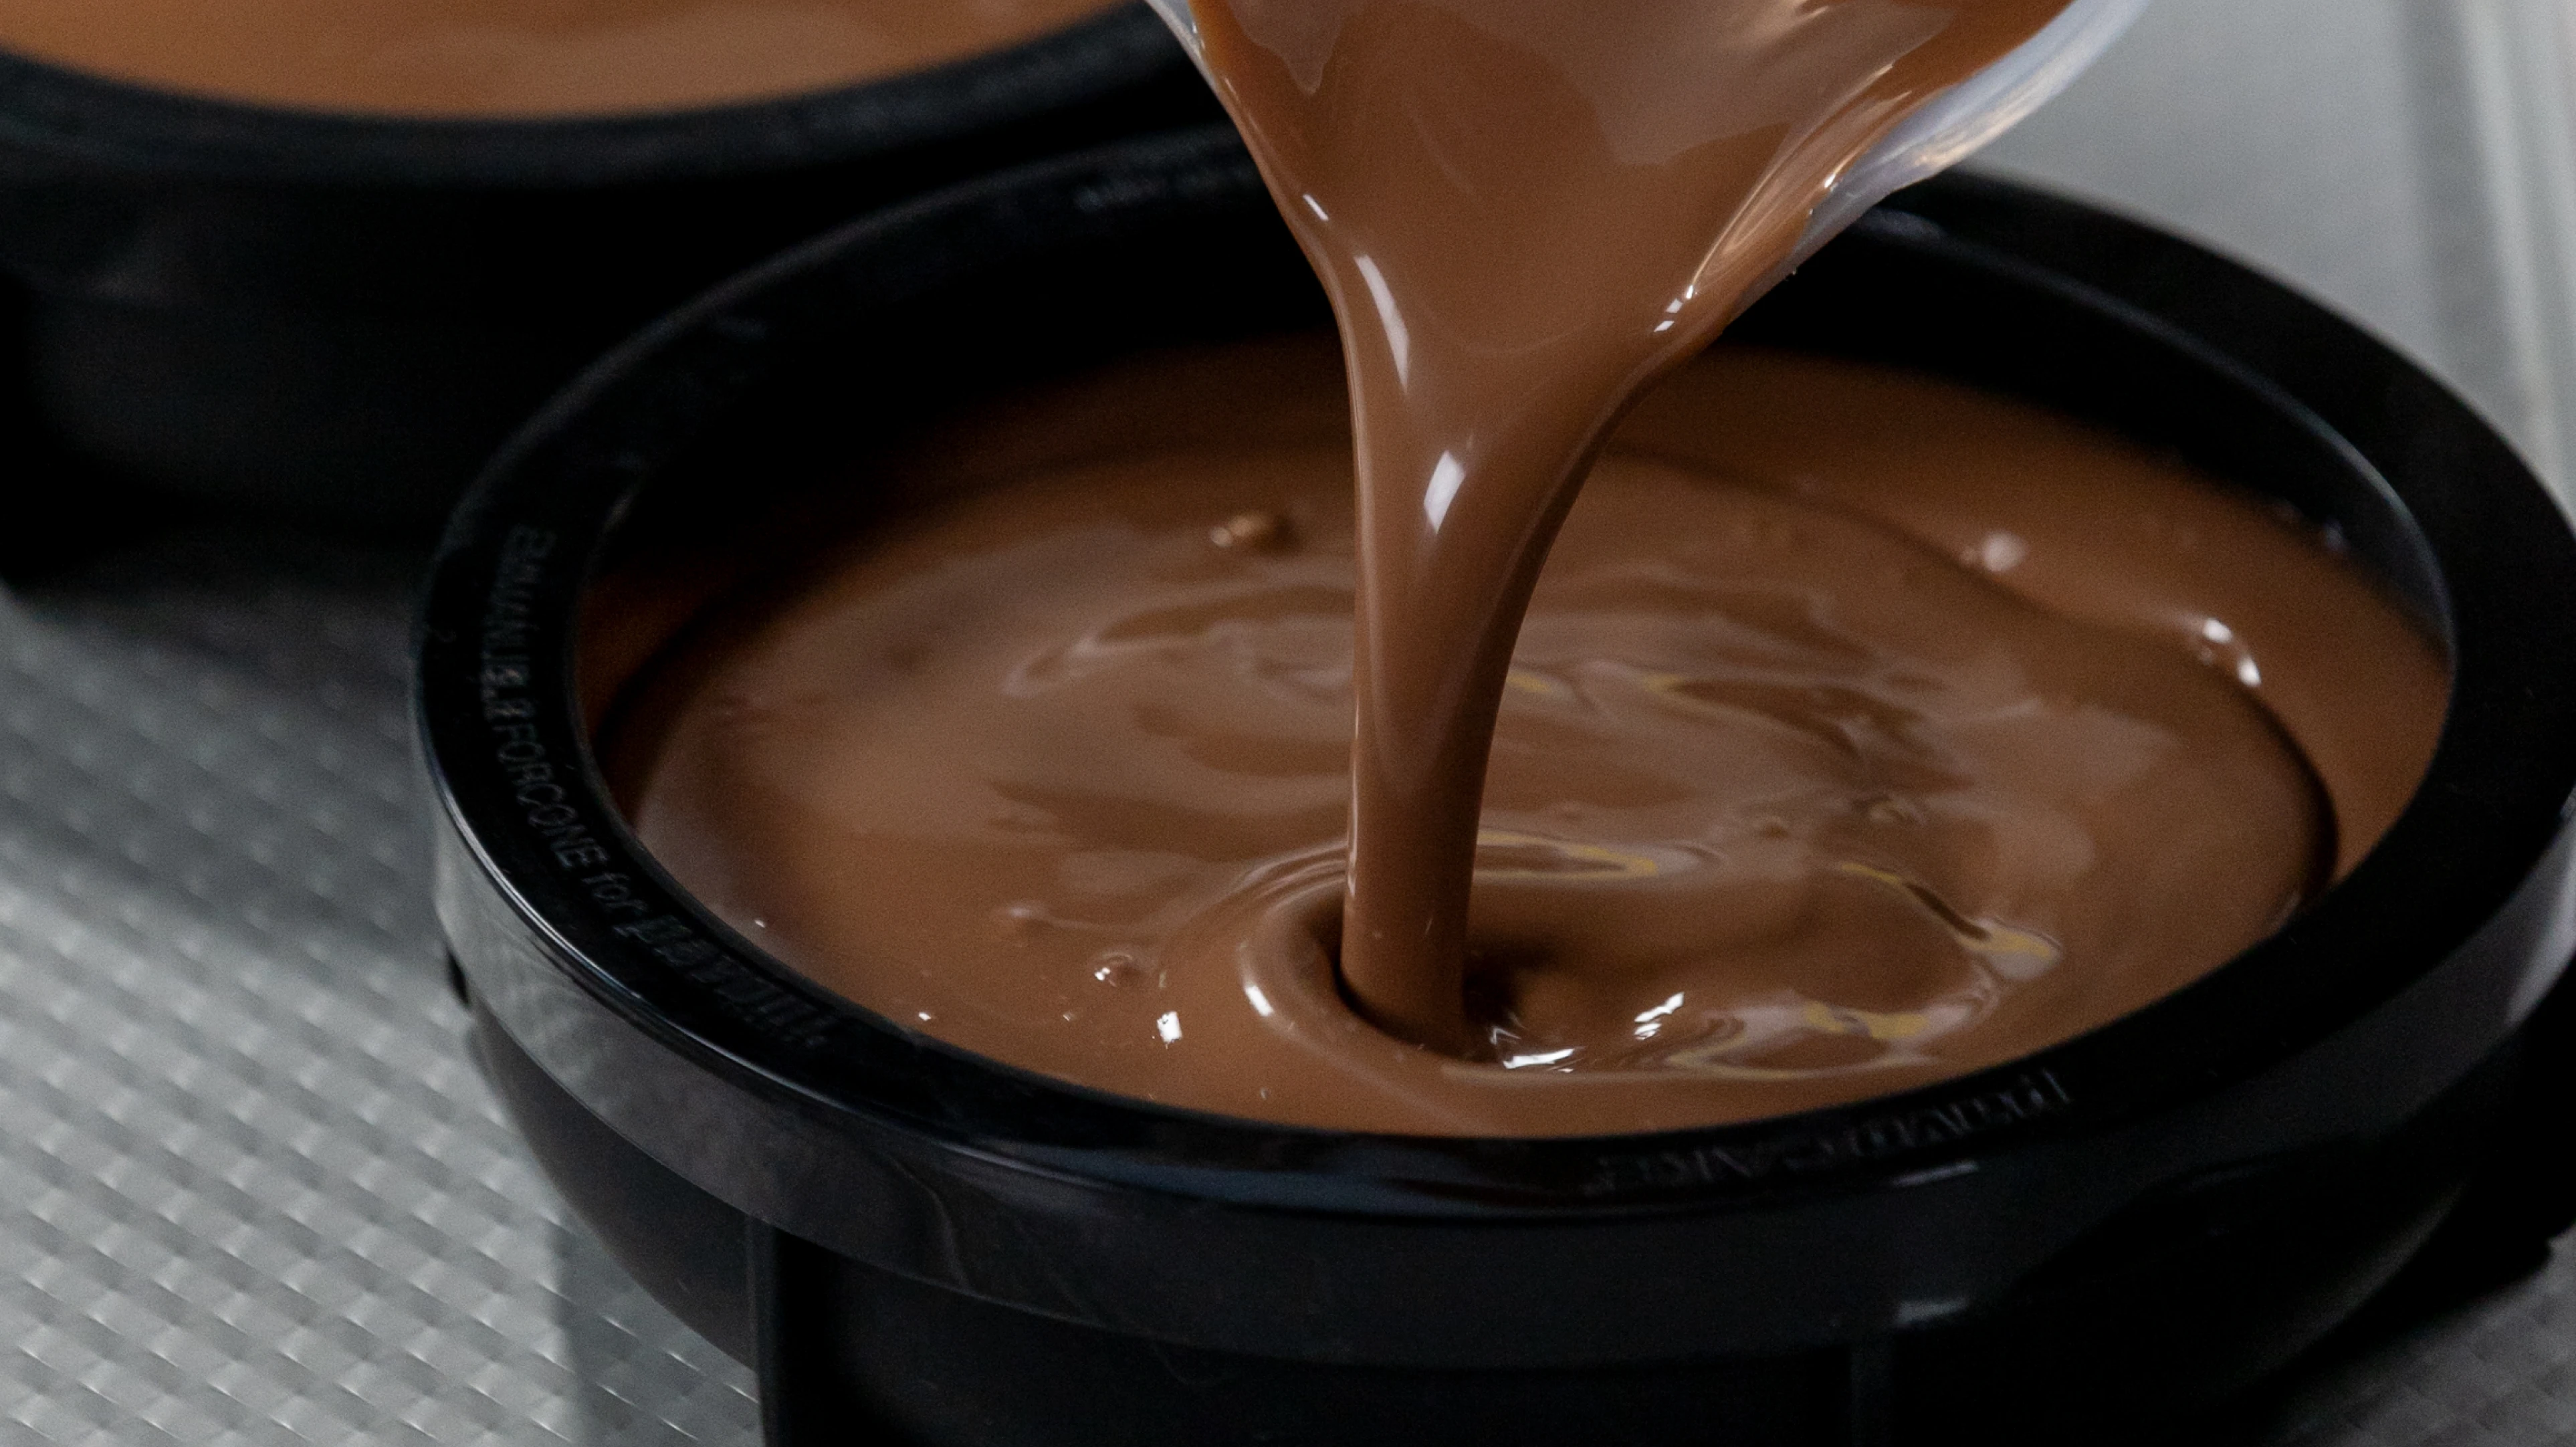 Best Dark Chocolate Mousse Recipe: How to Make Dark Chocolate Mousse?